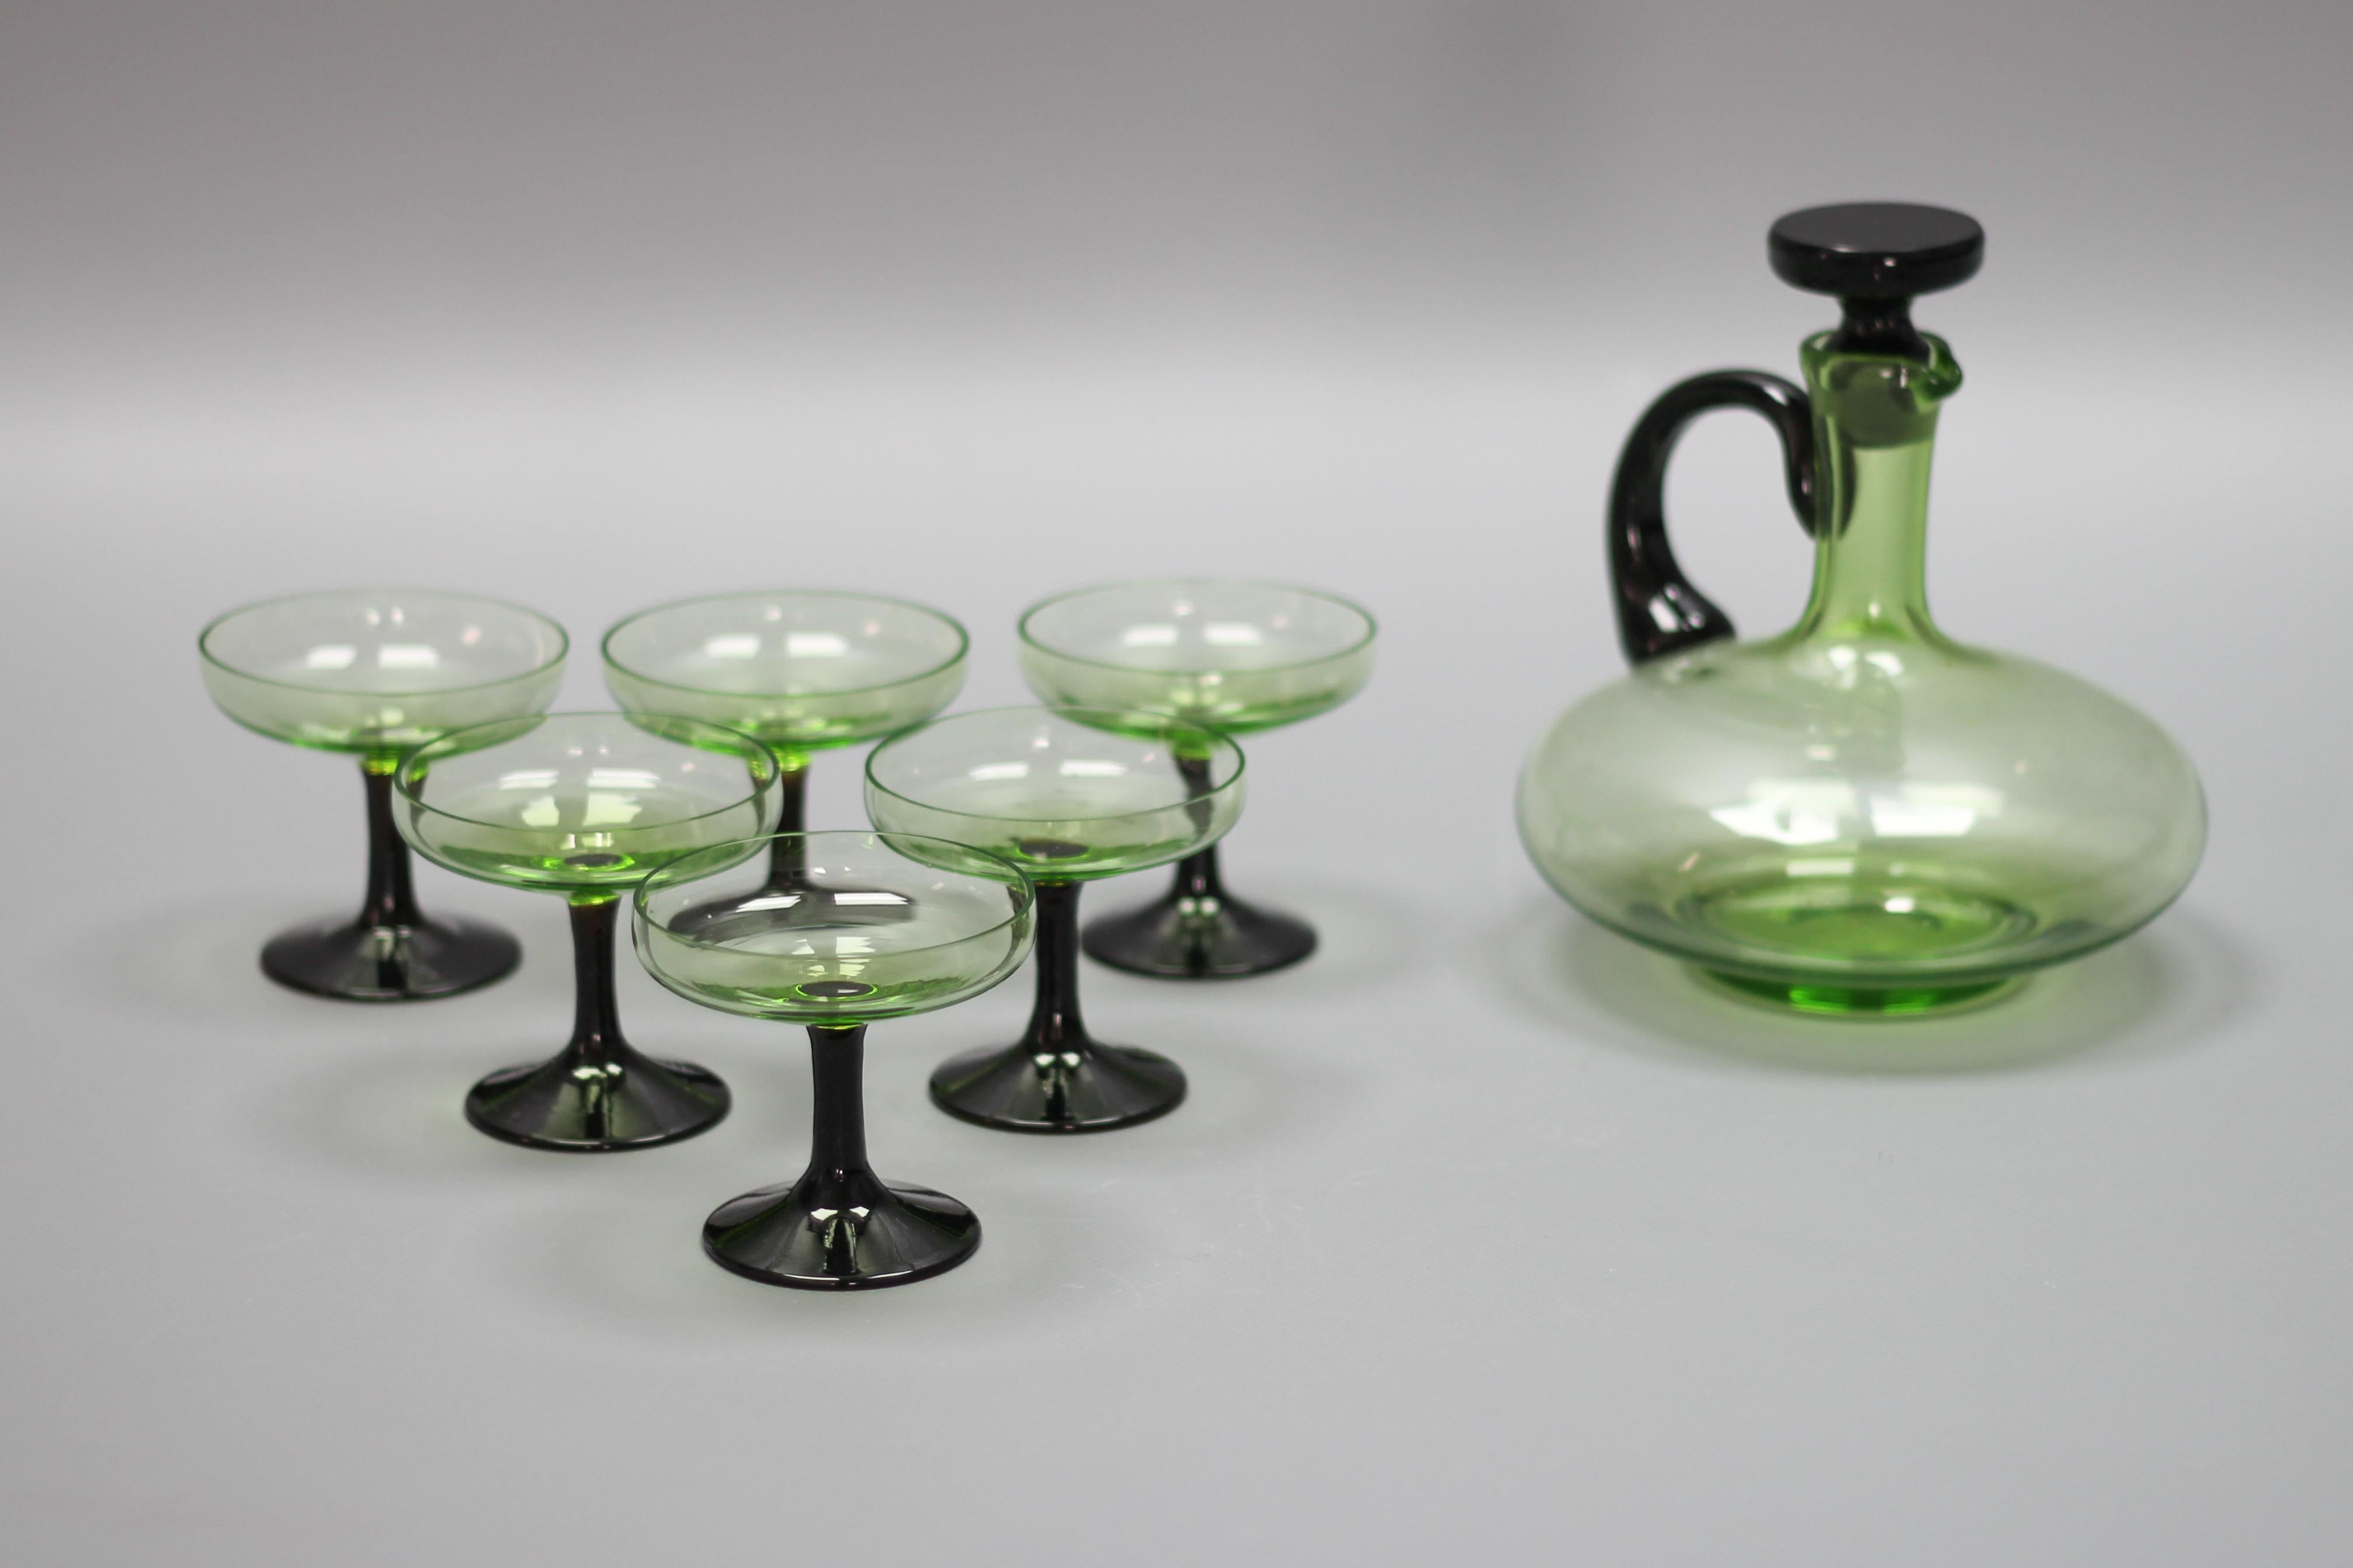 Mid-Century Modern set of green and black glass decanter and six glasses, Germany, circa the 1950s.
This adorable vintage set features six light green glasses with black stems and a beautifully shaped light green decanter with a black glass stopper